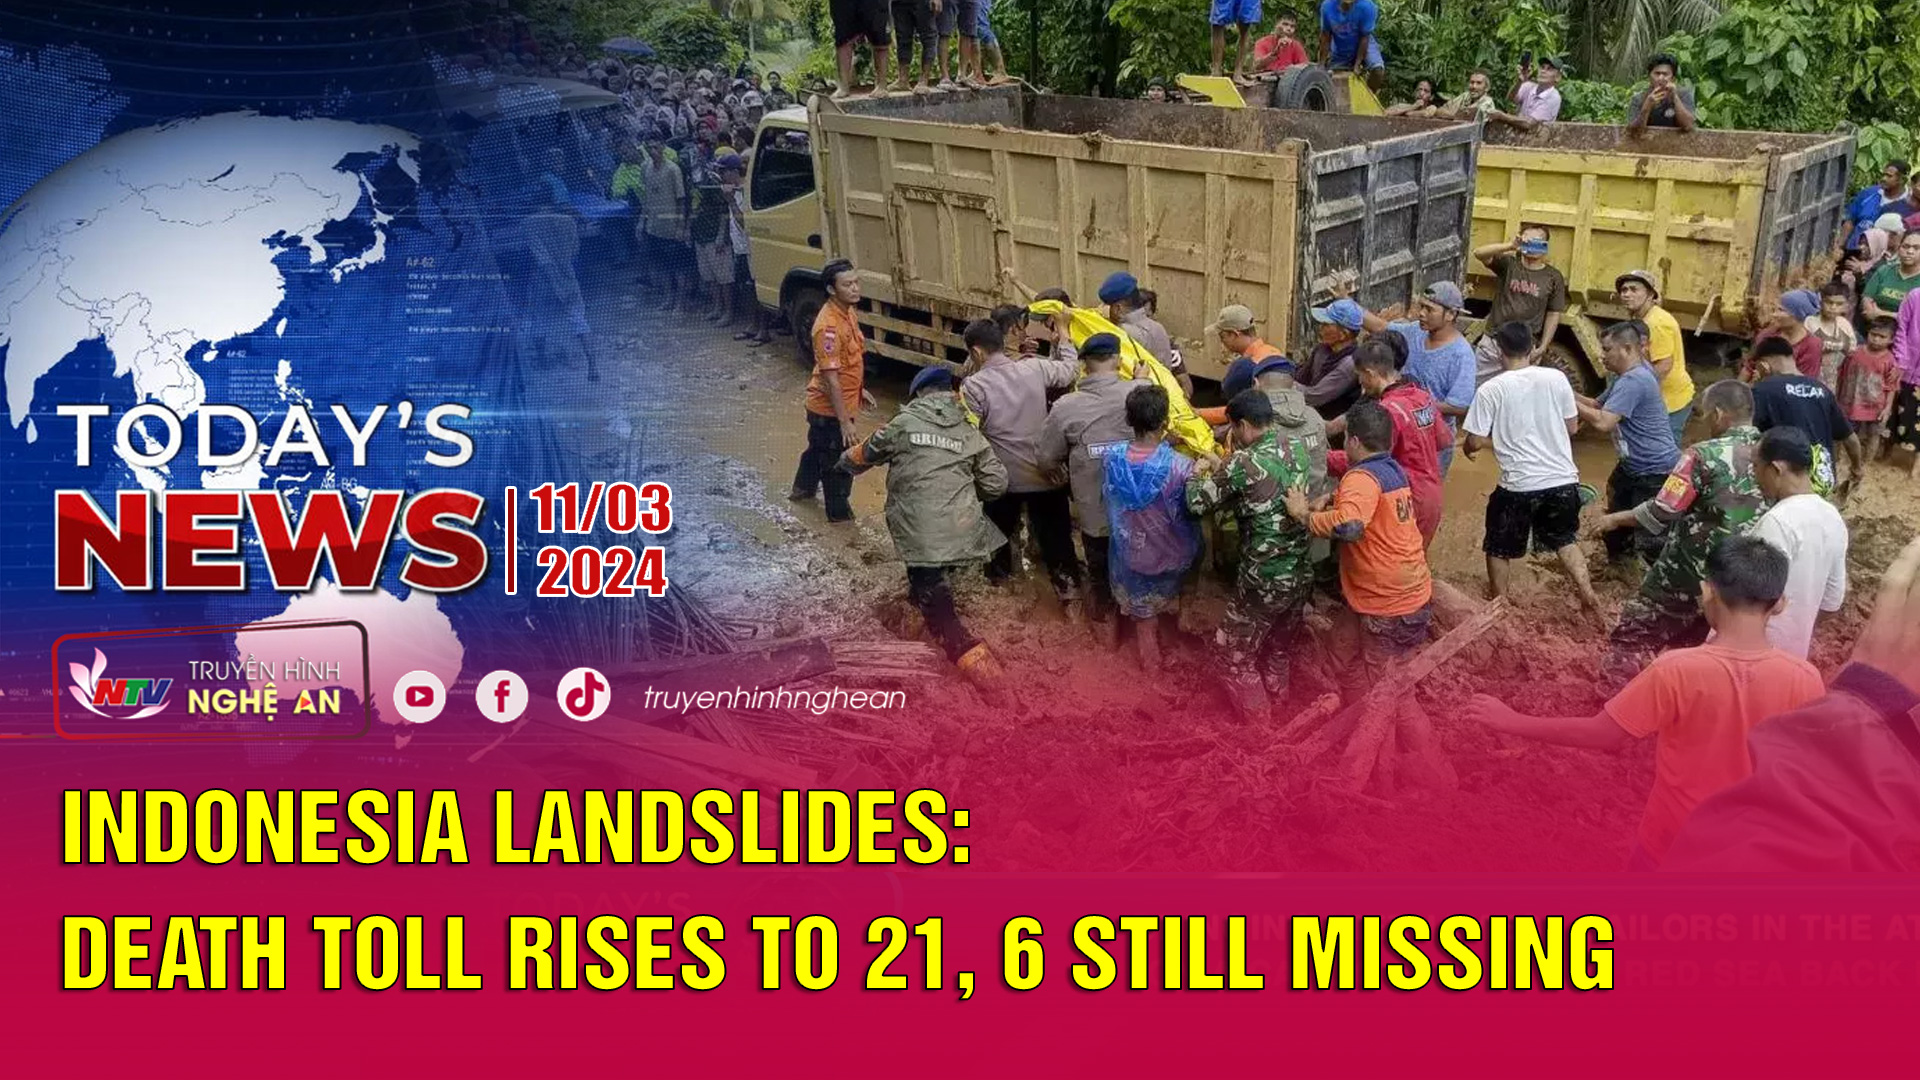 Today's News 11/03/2024: Indonesia landslides: Death toll rises to 21, 6 still missing